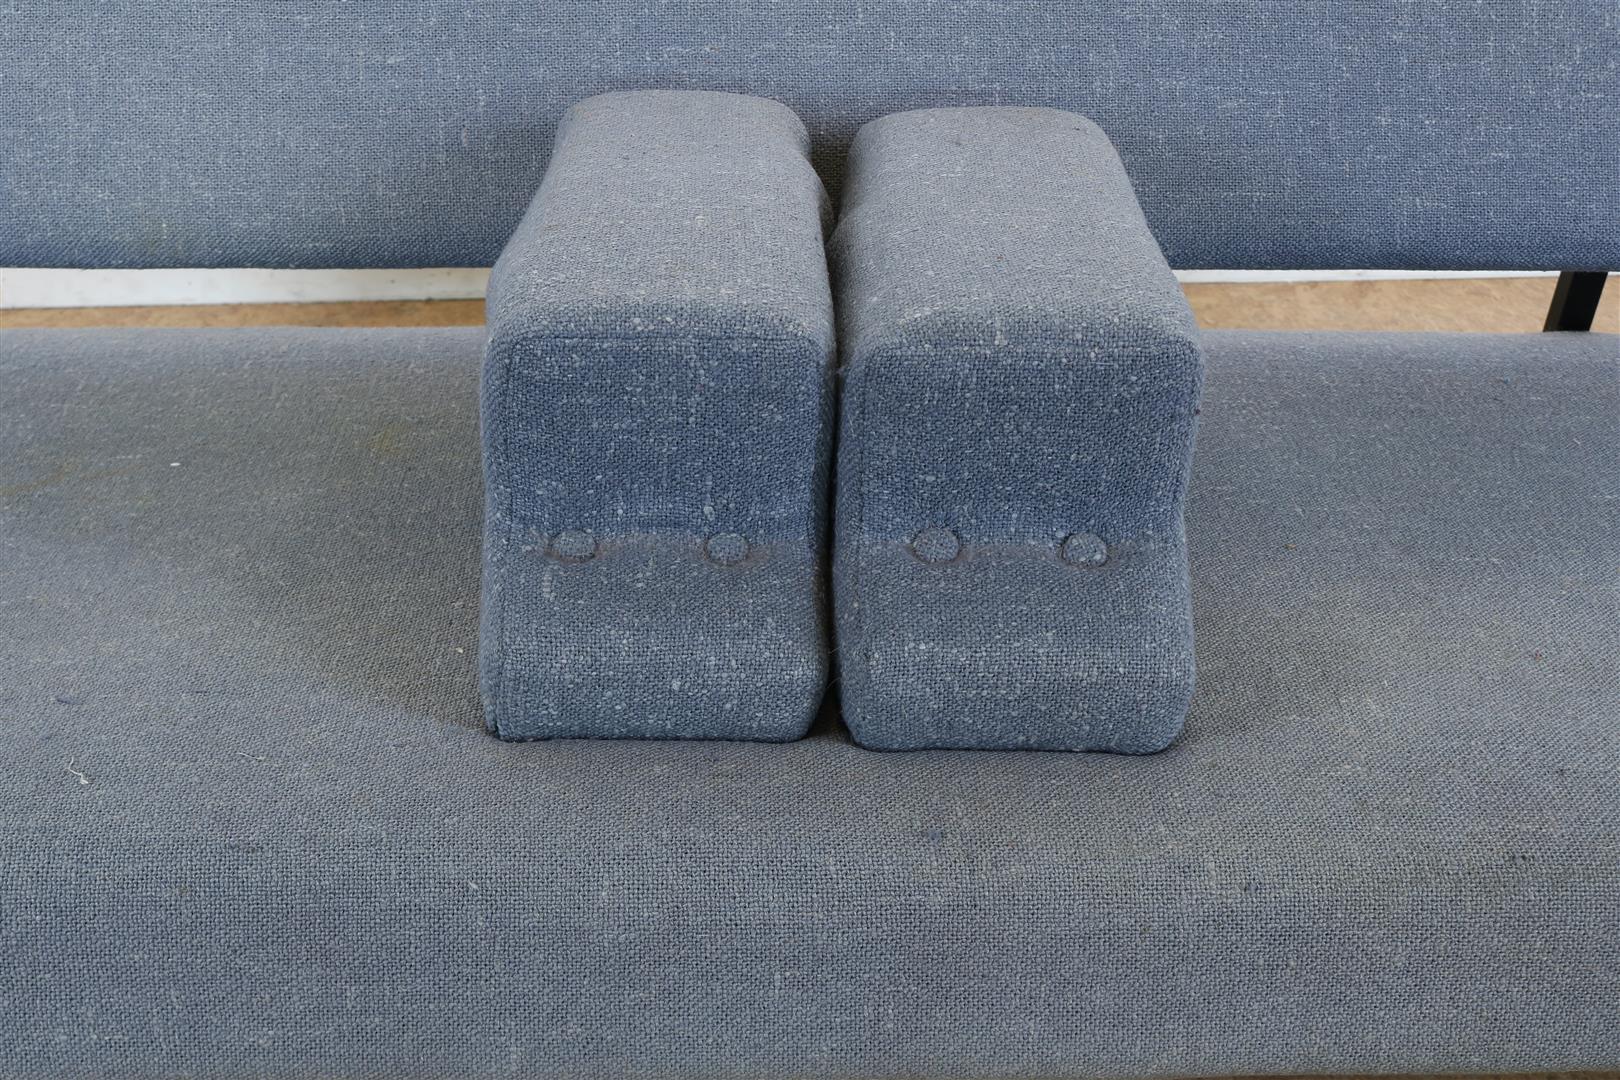 Designer sofa bed with gray wool upholstery and 2 loose cushions on a black base, Martin Visser, - Image 6 of 8